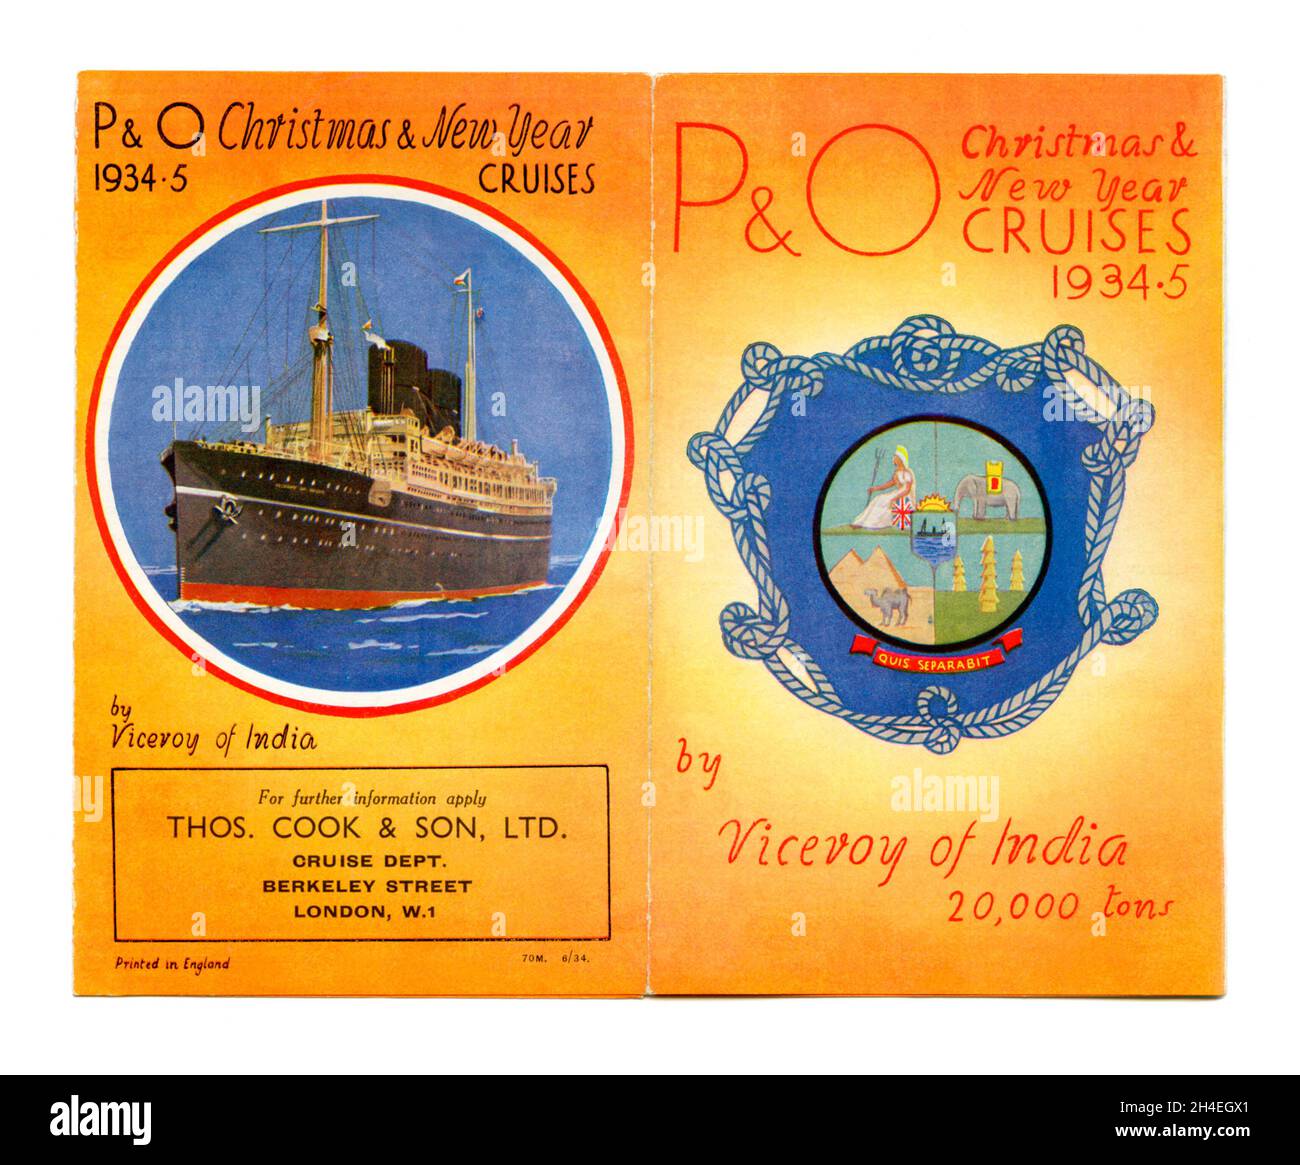 A front and back cover of a promotional leaflet by Thomas Cook for P&O Christmas and New Year cruises aboard the Viceroy of India in 1934. The ocean liner of the Peninsular and Oriental Steam Navigation Company (P&O) was a British Royal Mail Ship on the Tilbury–Bombay route. The accommodation aboard was considered luxurious by the standards of the era and included an indoor swimming pool – a vintage 1930s graphics. Stock Photo